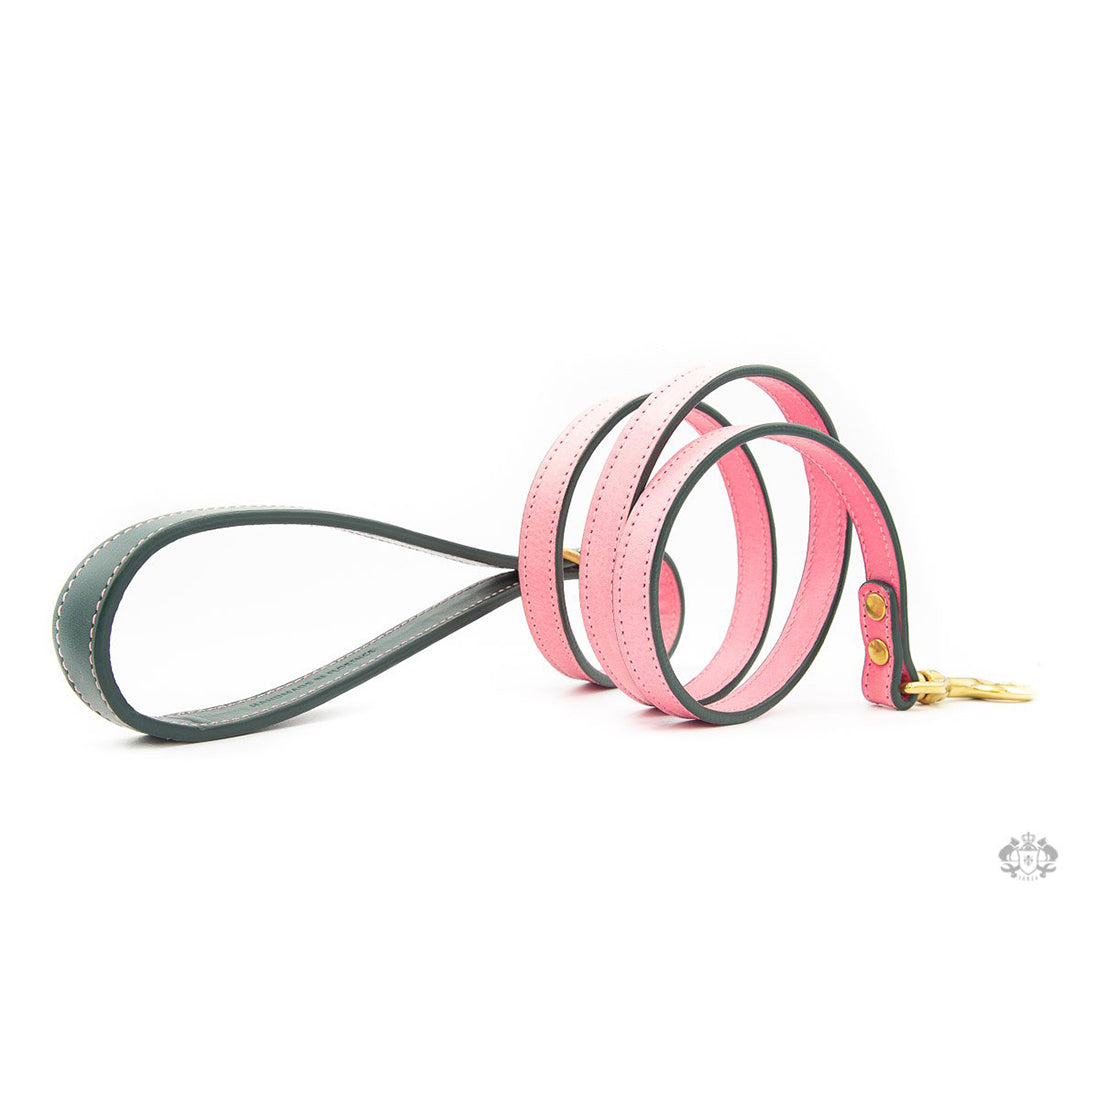 ROSES PINK LEATHER DOG LEAD